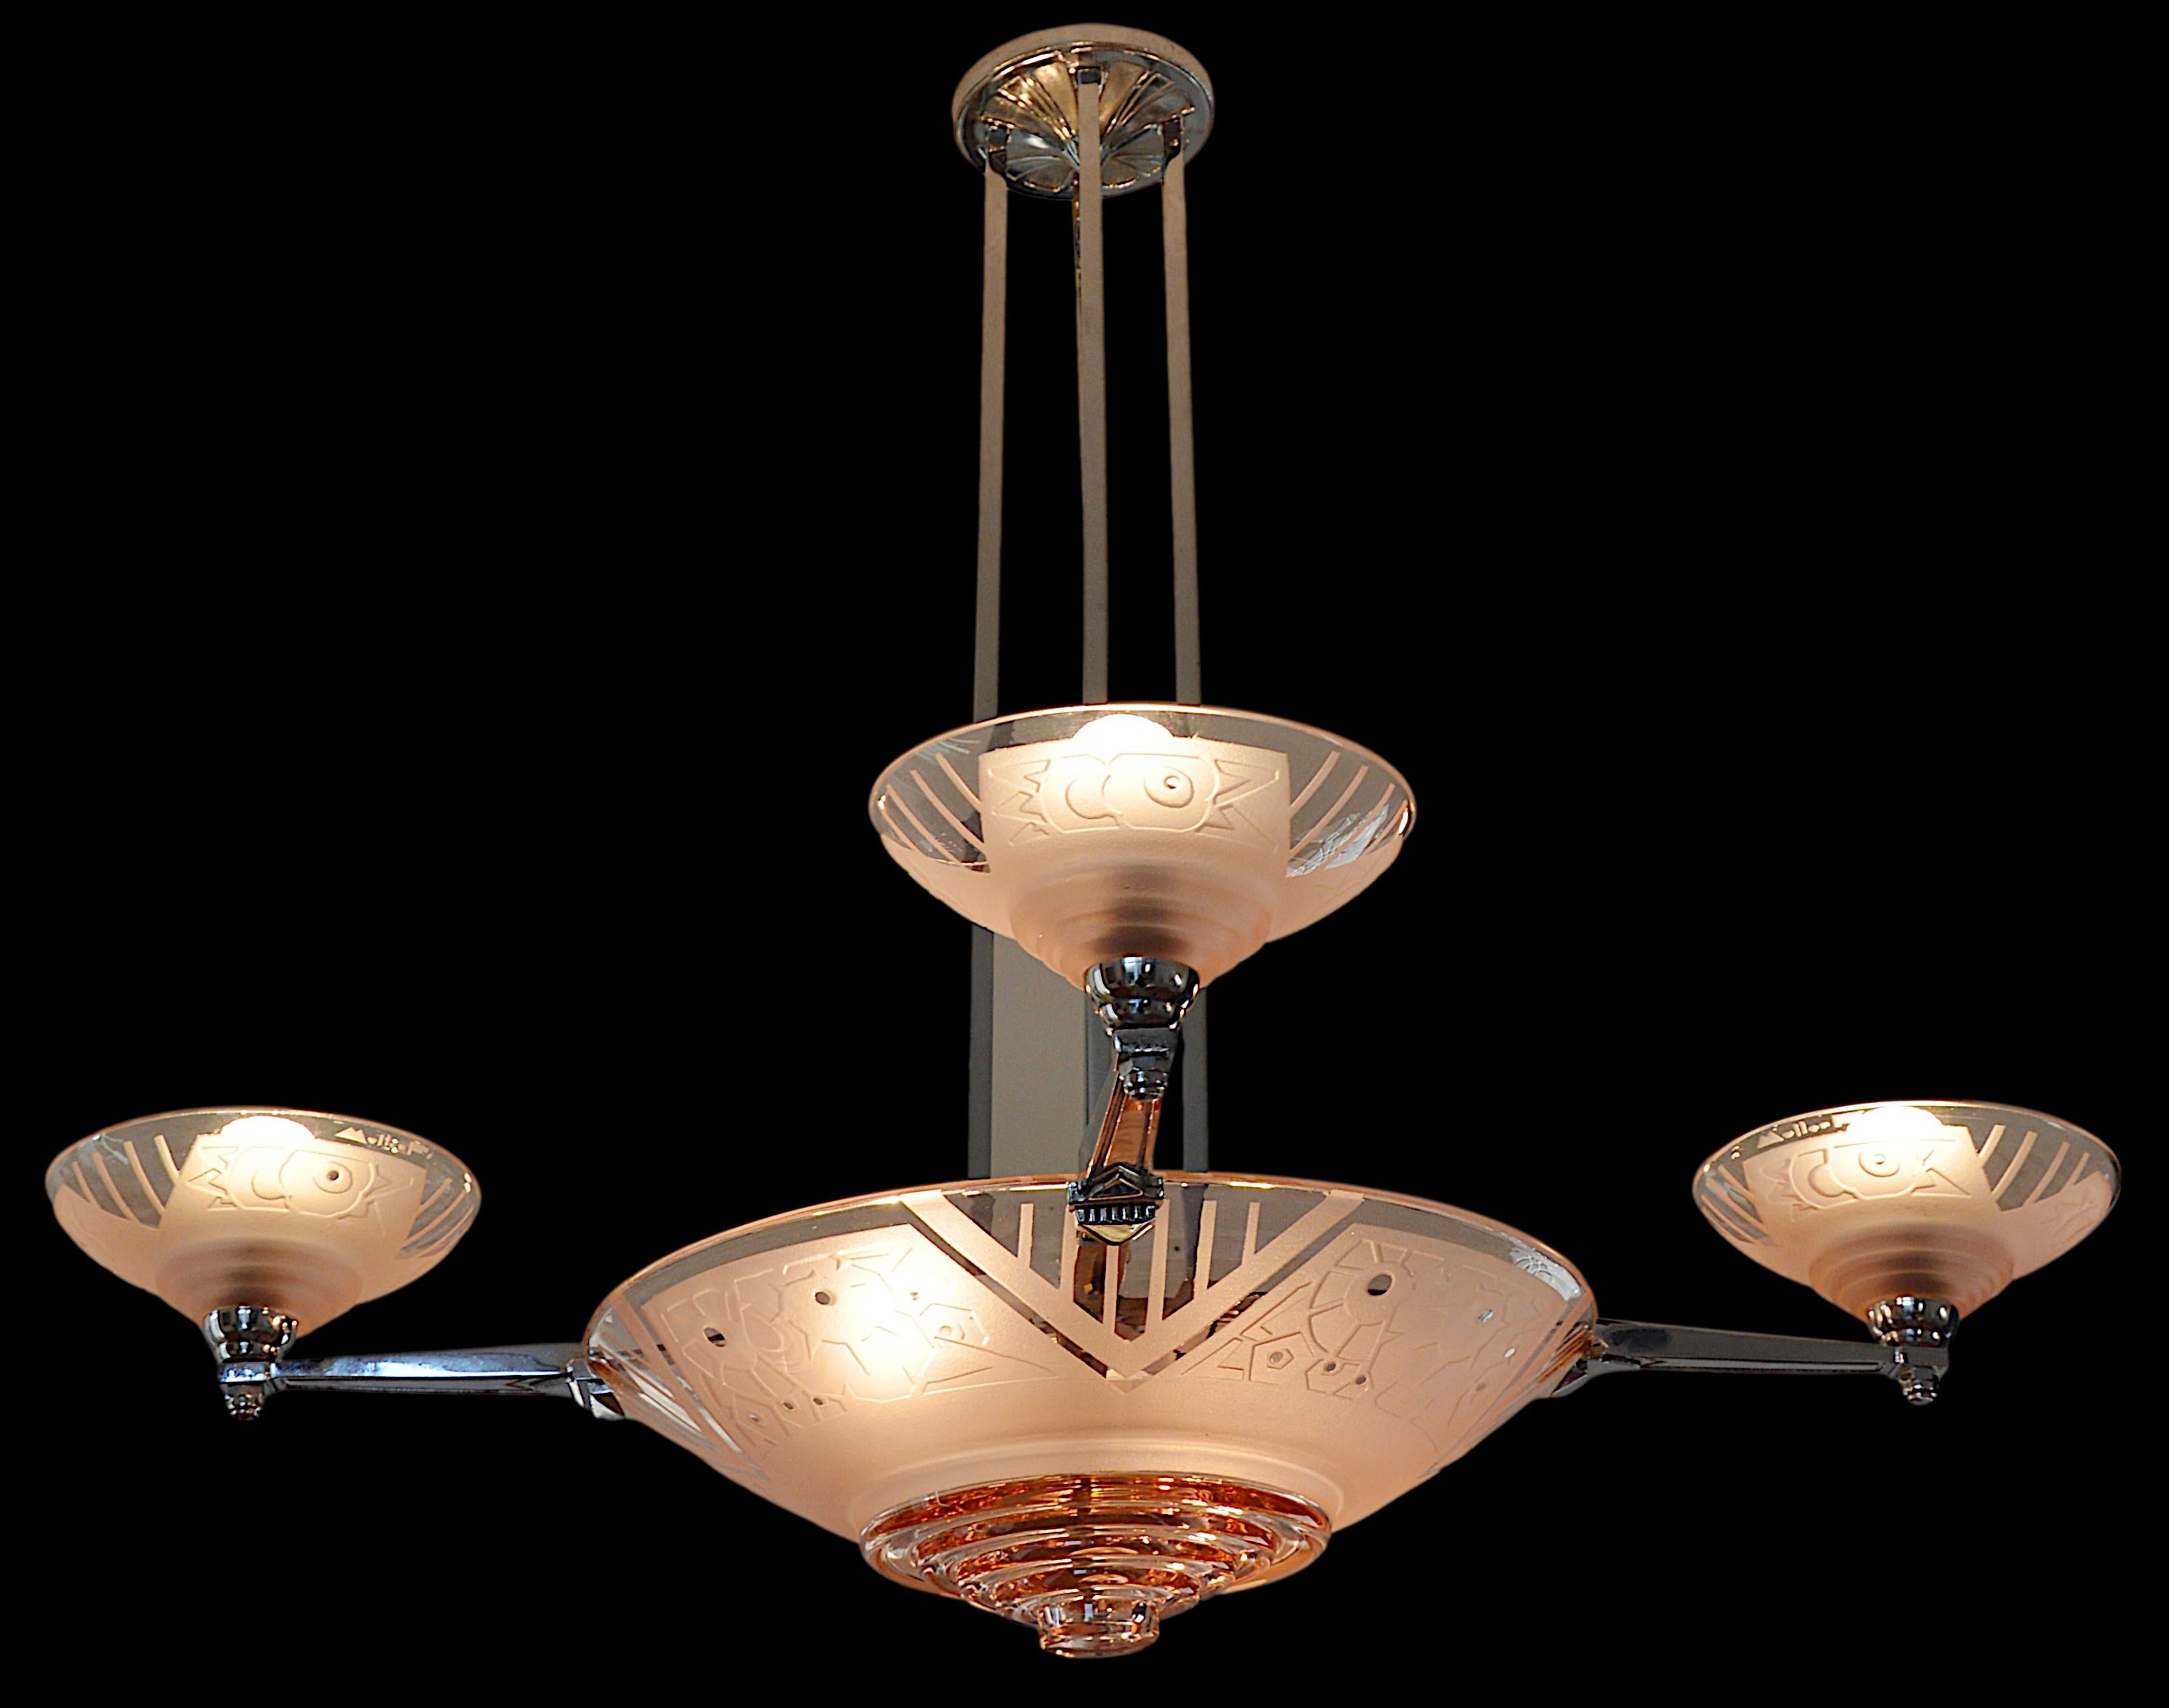 French Art Deco chandelier by MULLER FRERES (Luneville), France, early 1930s. Stylized acid-etched flower pattern on the shades. Nickel-plated bronze. Height : 28.7